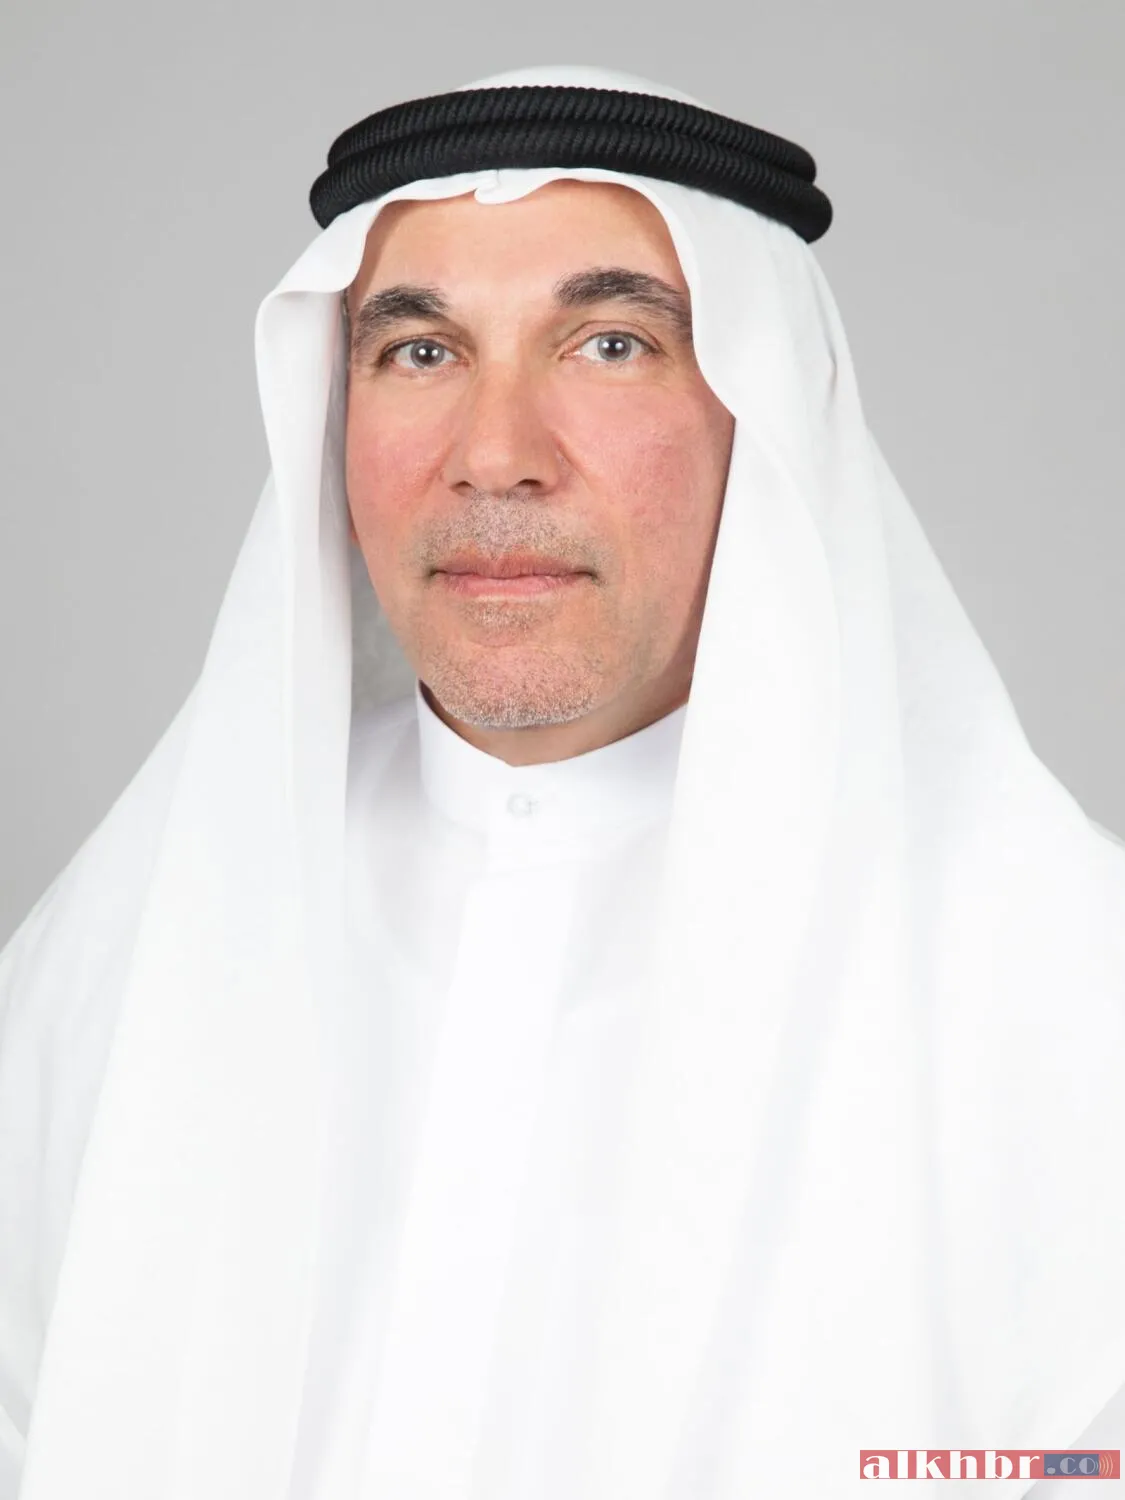 Khalid Ali Al Bustani, Director General of the Federal Tax Authority